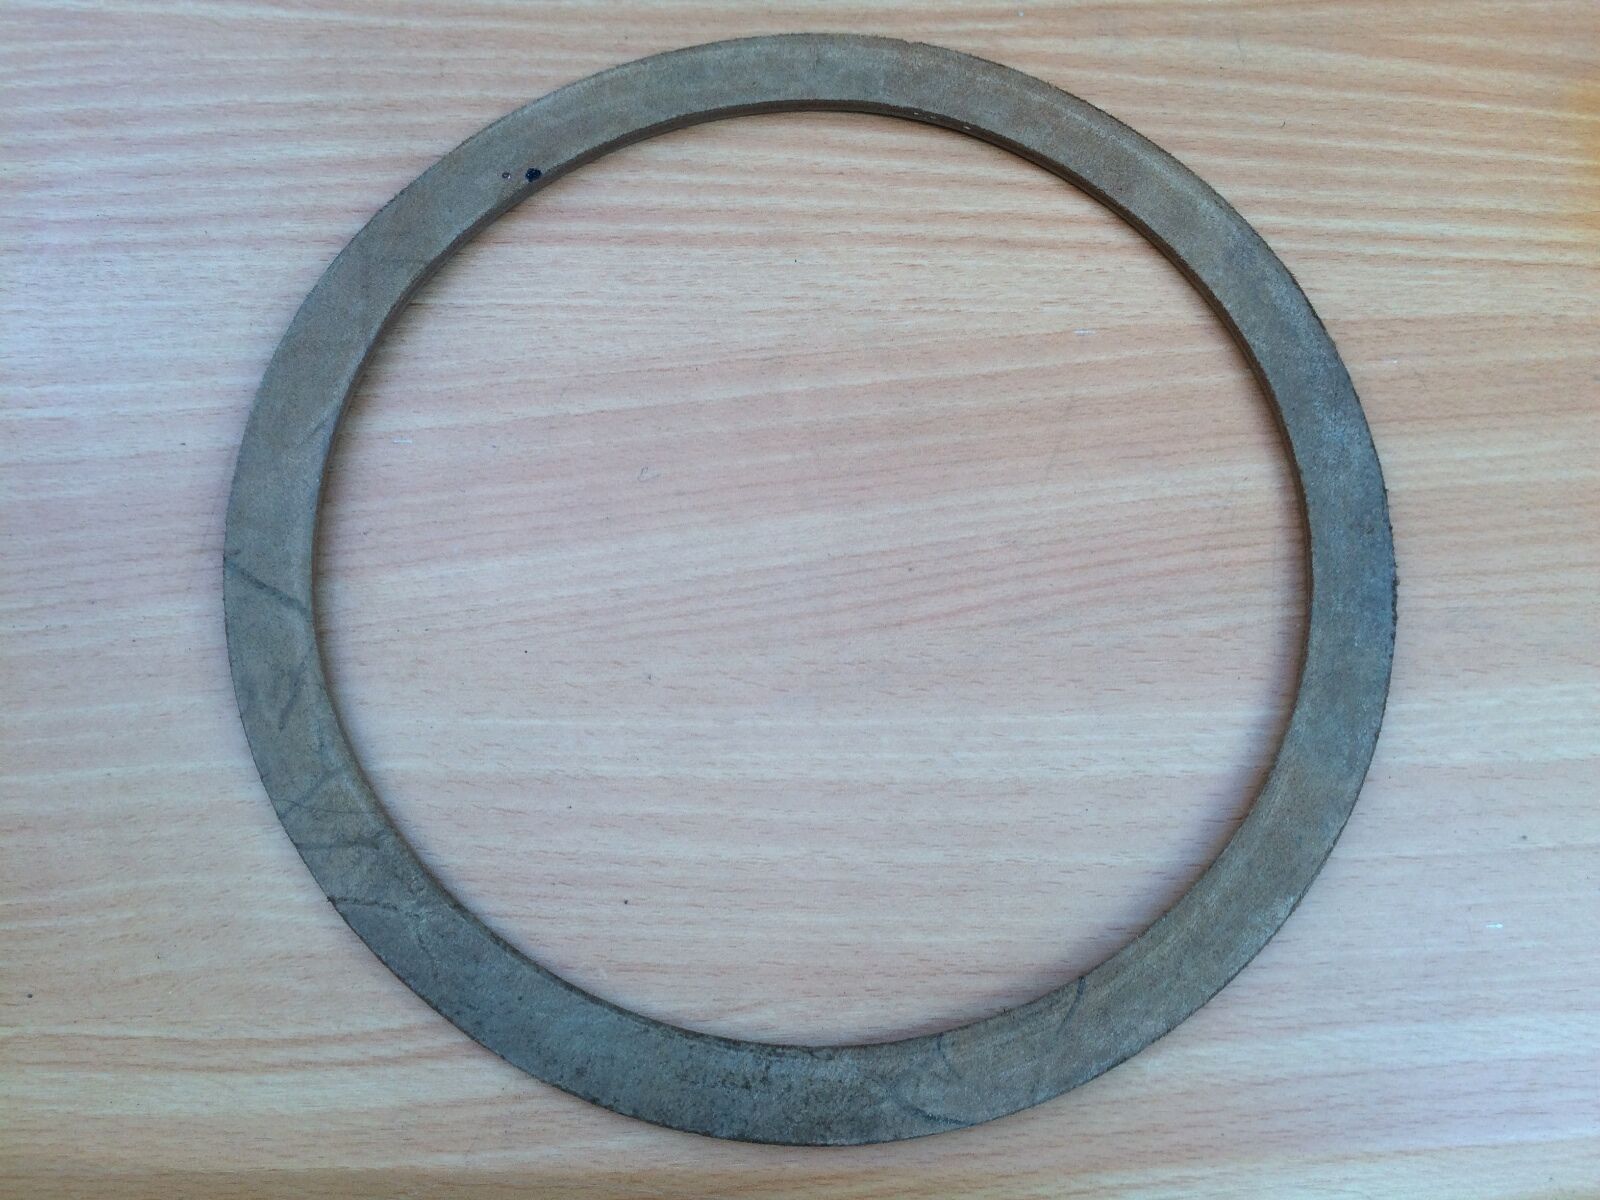 Original leather gasket for Russian 12-bolt diving helmet. Not used.